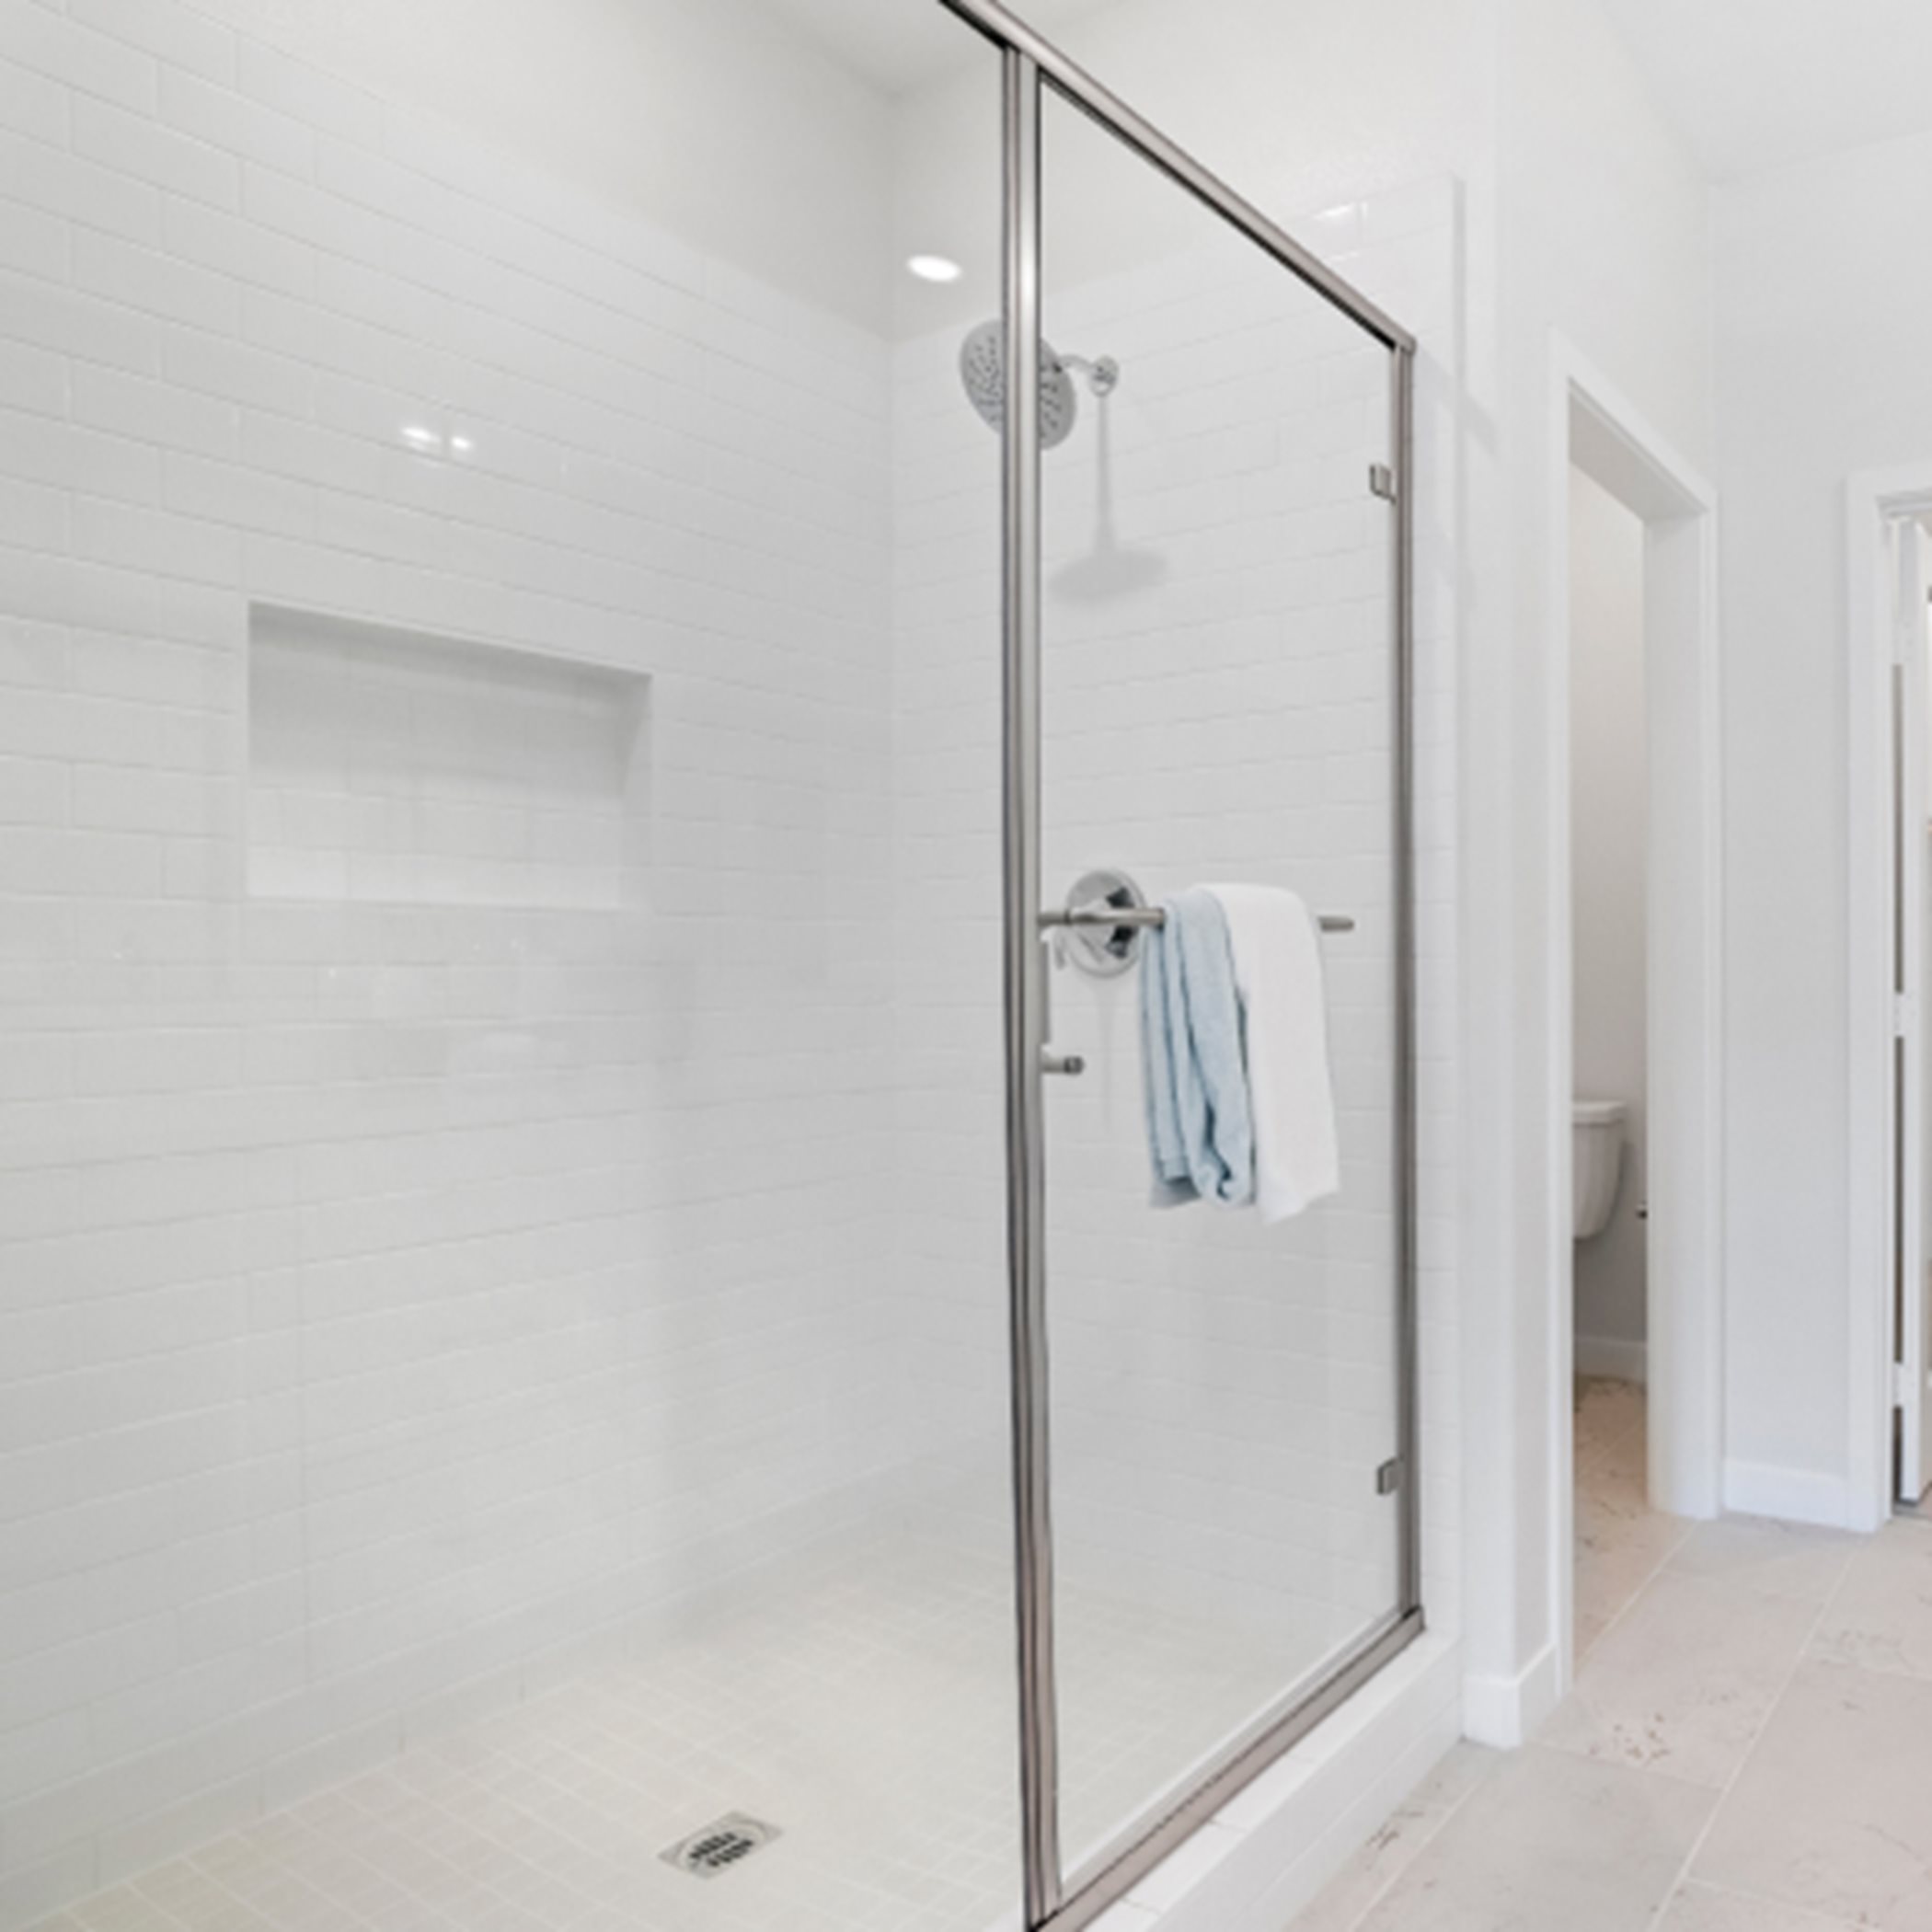 Glass-enclosed shower